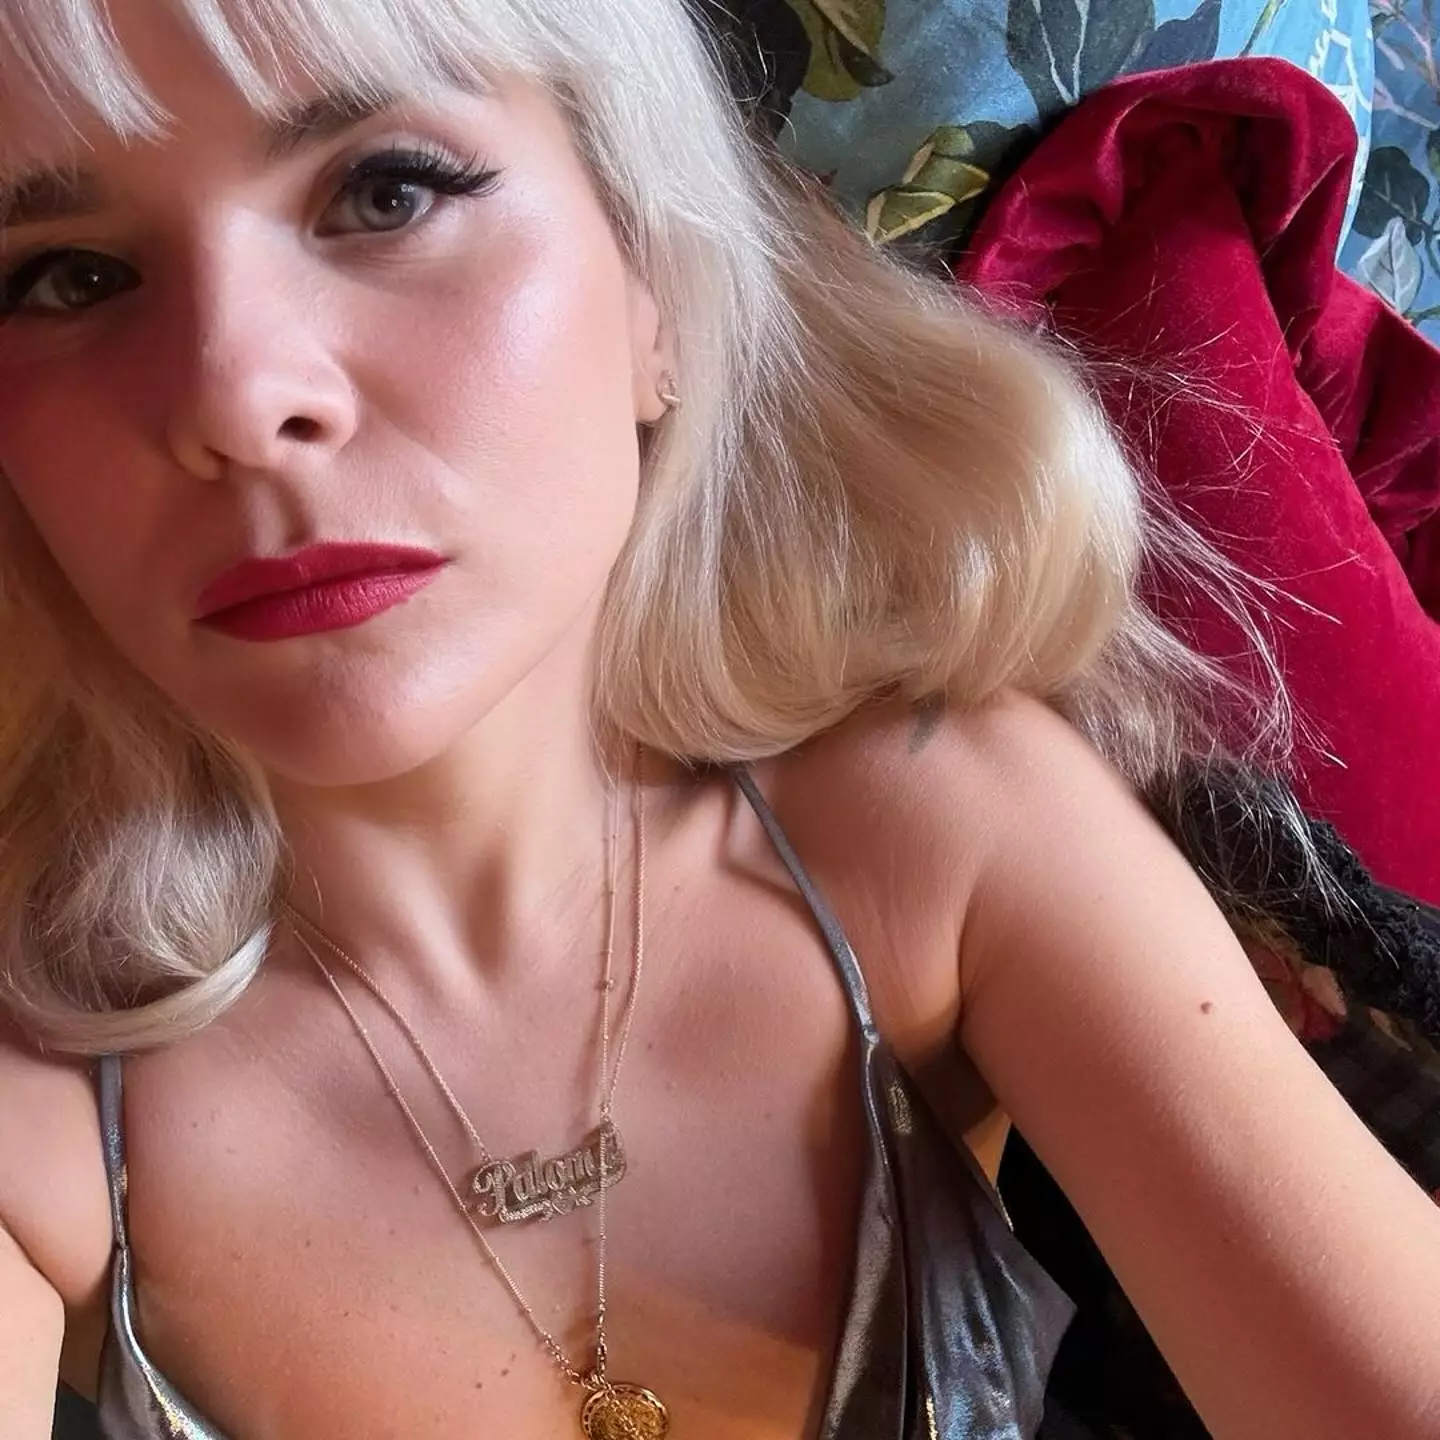 She said she might only have one more album in her. (Instagram/@palomafaith)